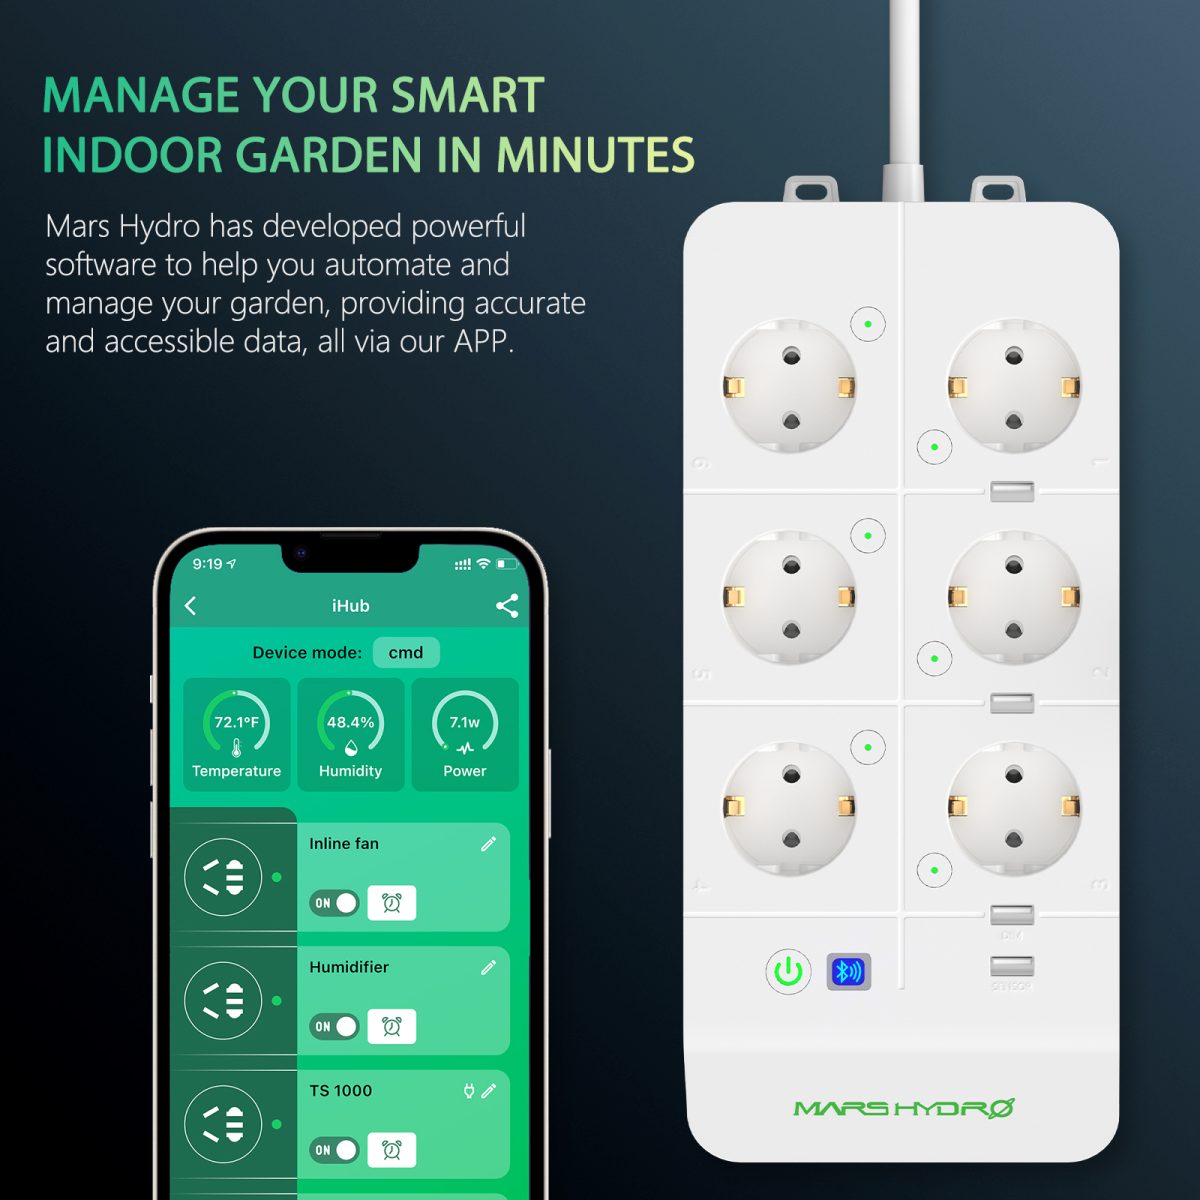 The iHub smart power strip has a built-in 16A overcurrent fuse that will cut off power and notify you via the APP in case of overload. Together with the outlet safety doors, this power strip provides protection from sudden electric shock when plugged in.